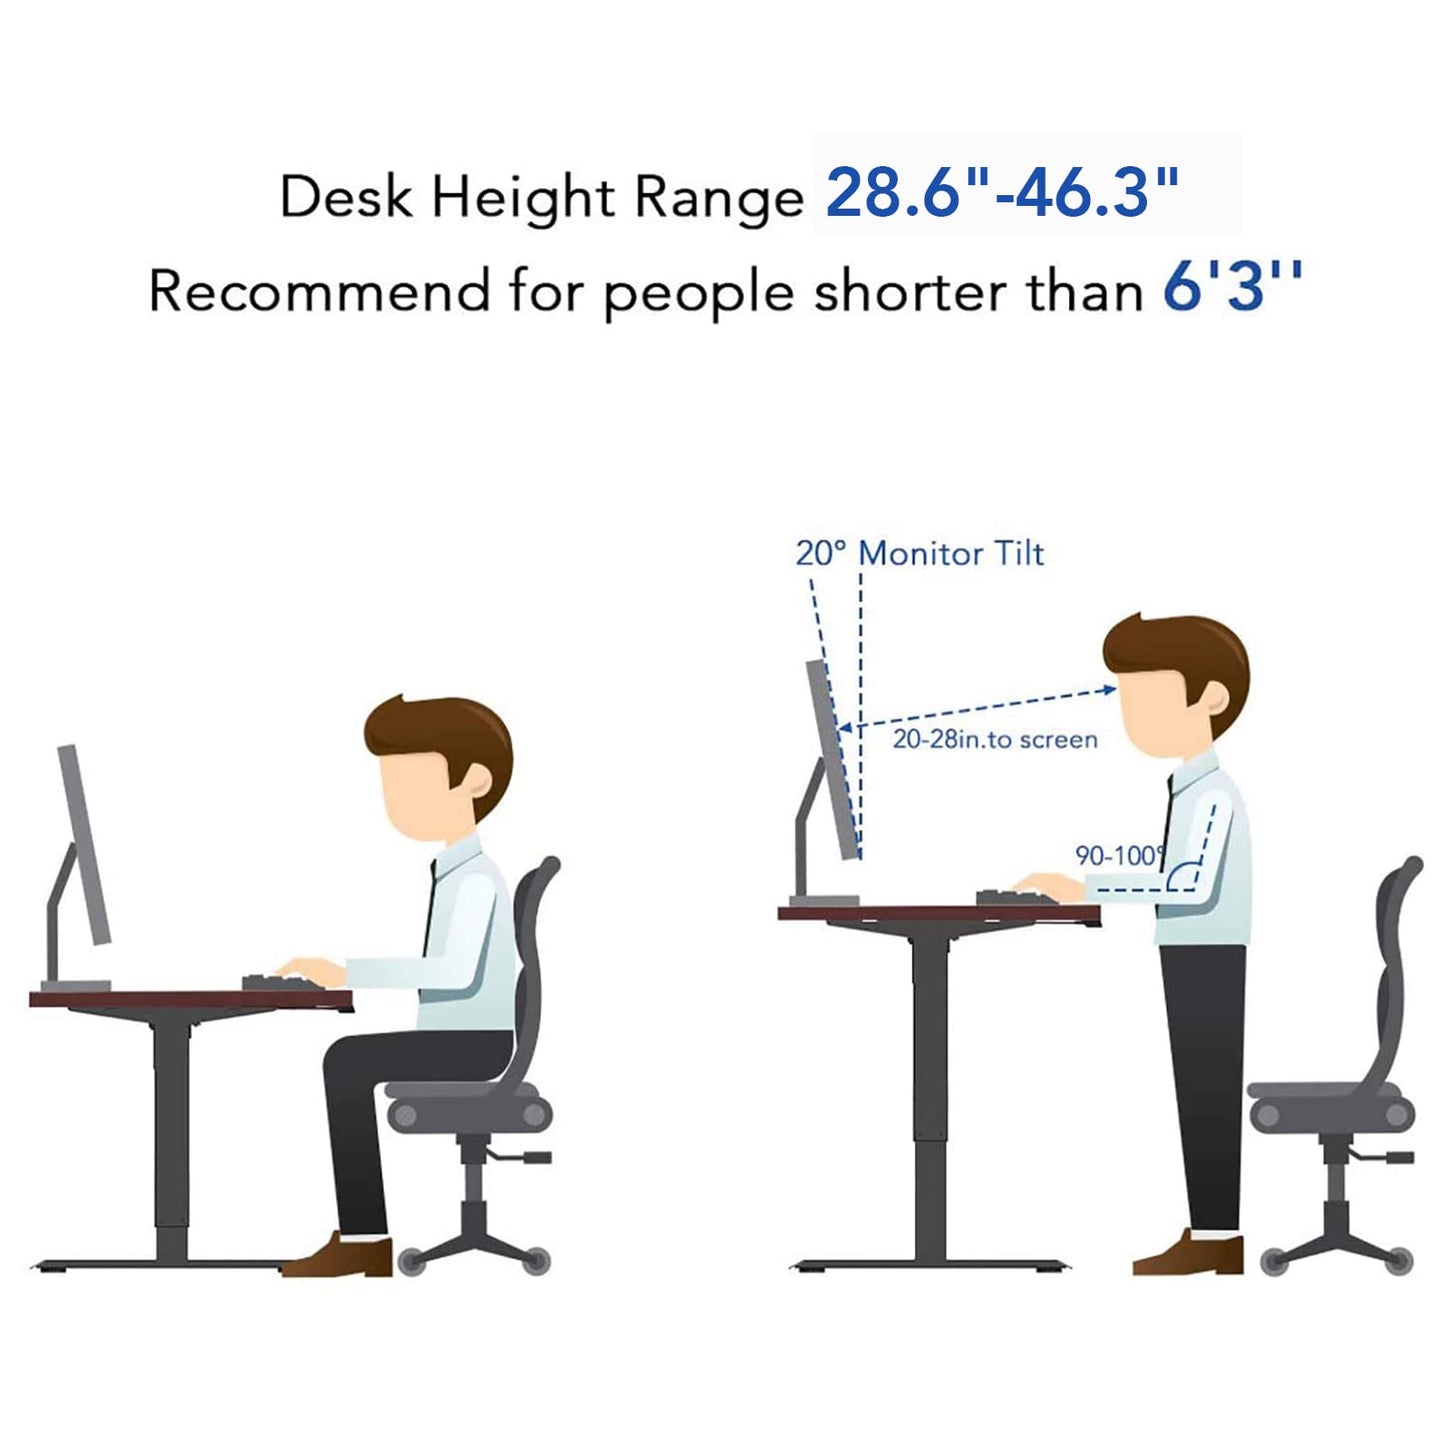 FLEXISPOT Electric Stand Up Desk Workstation 40 x 24 Inches Whole-Piece Desktop Ergonomic Height Adjustable Standing Desk (White Frame + 40" White